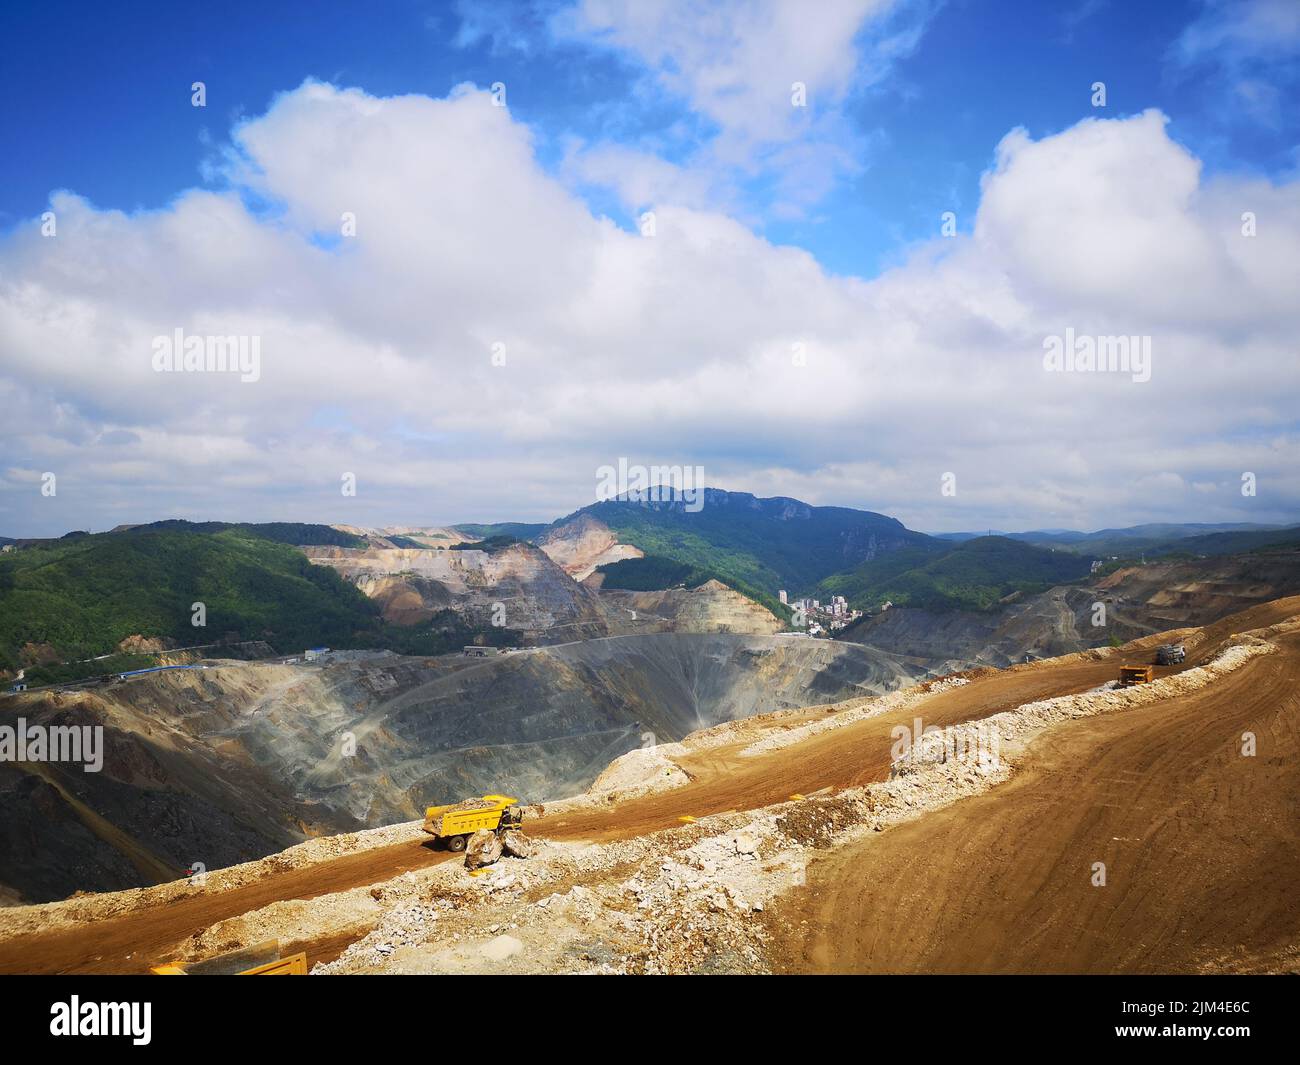 The view of the cars on the mine against the mountains range and blue sky. Majdanpek, Serbia. Stock Photo